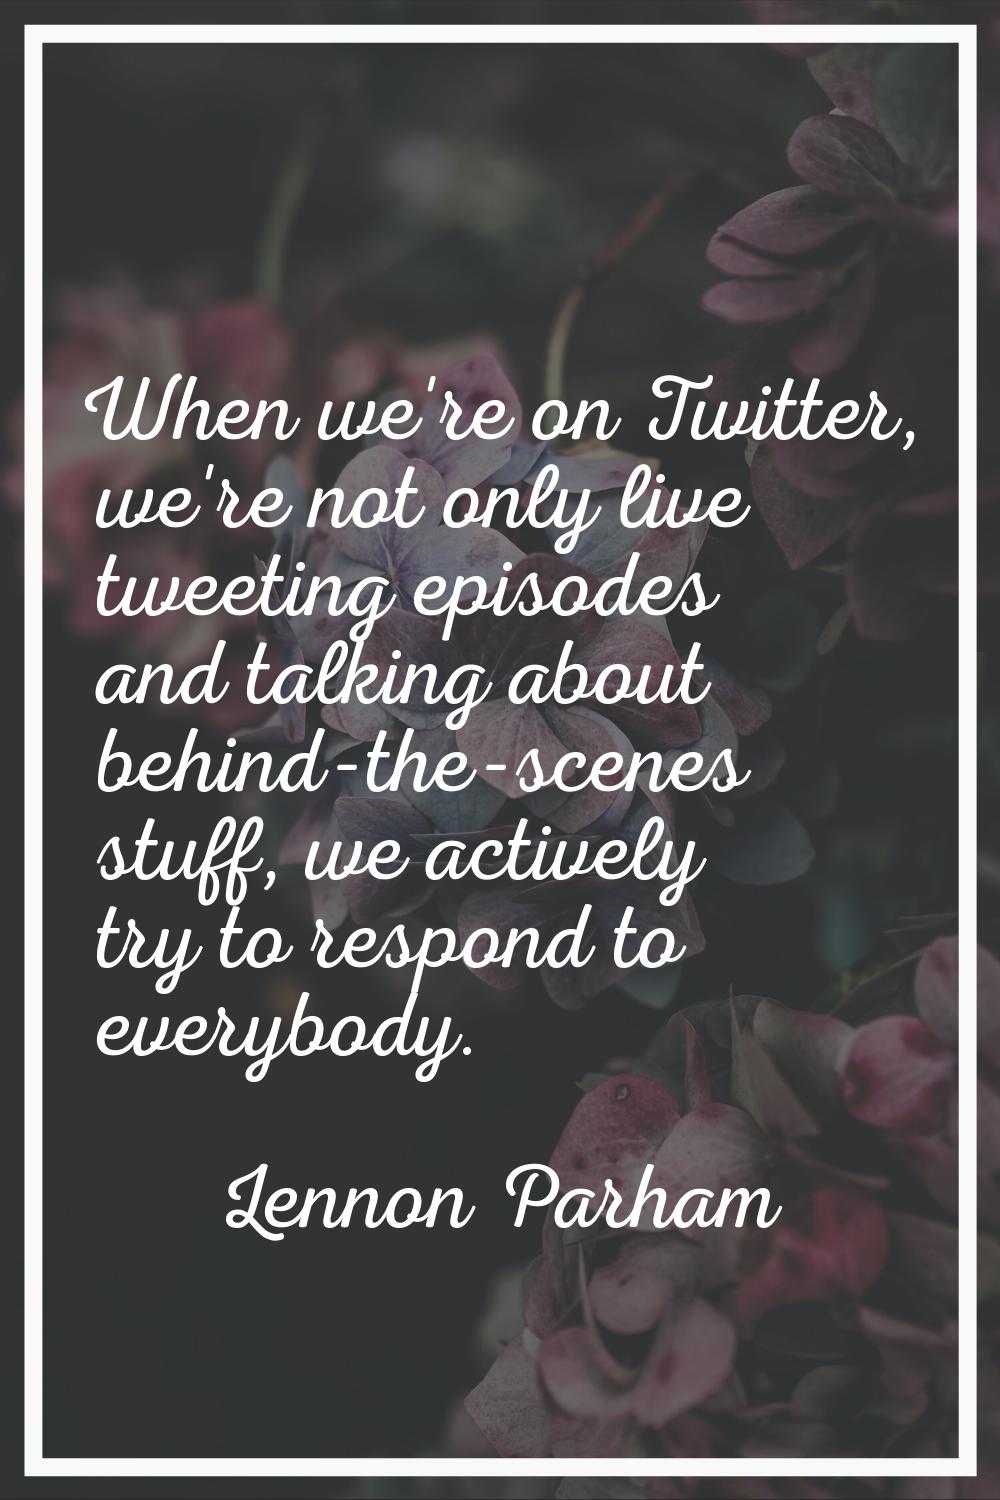 When we're on Twitter, we're not only live tweeting episodes and talking about behind-the-scenes st